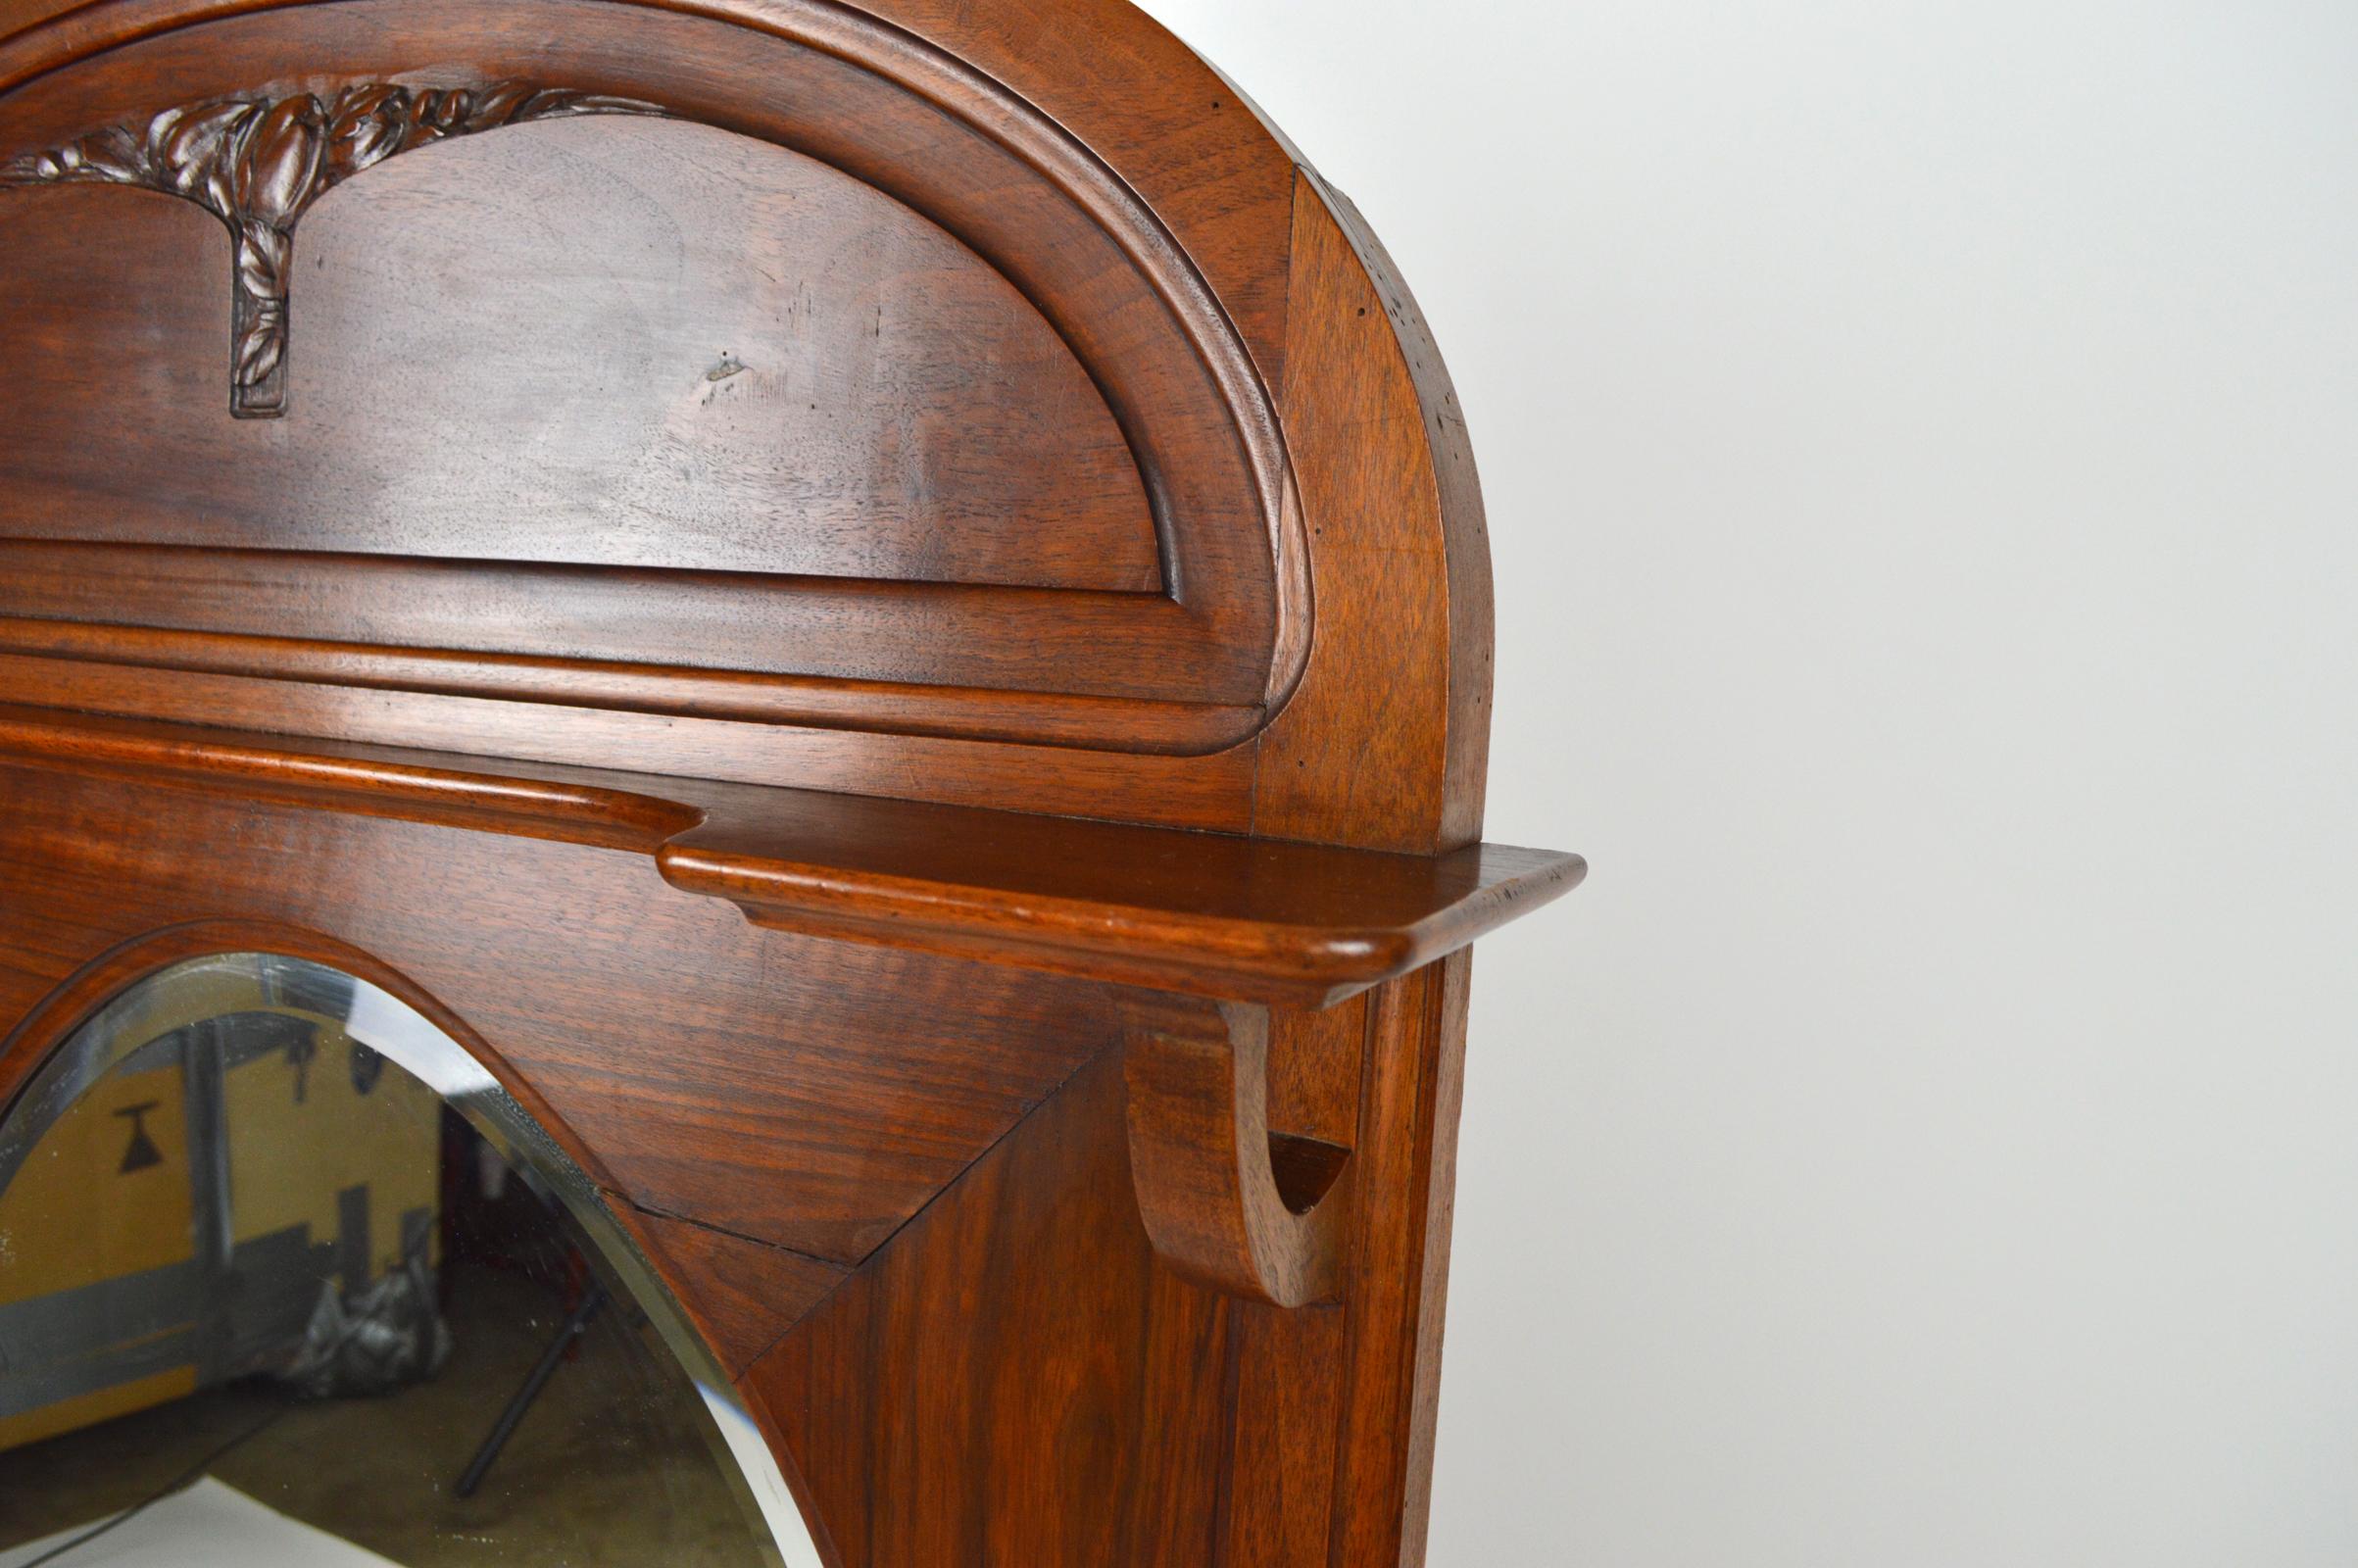 French Art Nouveau Fireplace Mantel Mirror, Carved Walnut on a Fruit Theme, 1910 For Sale 4